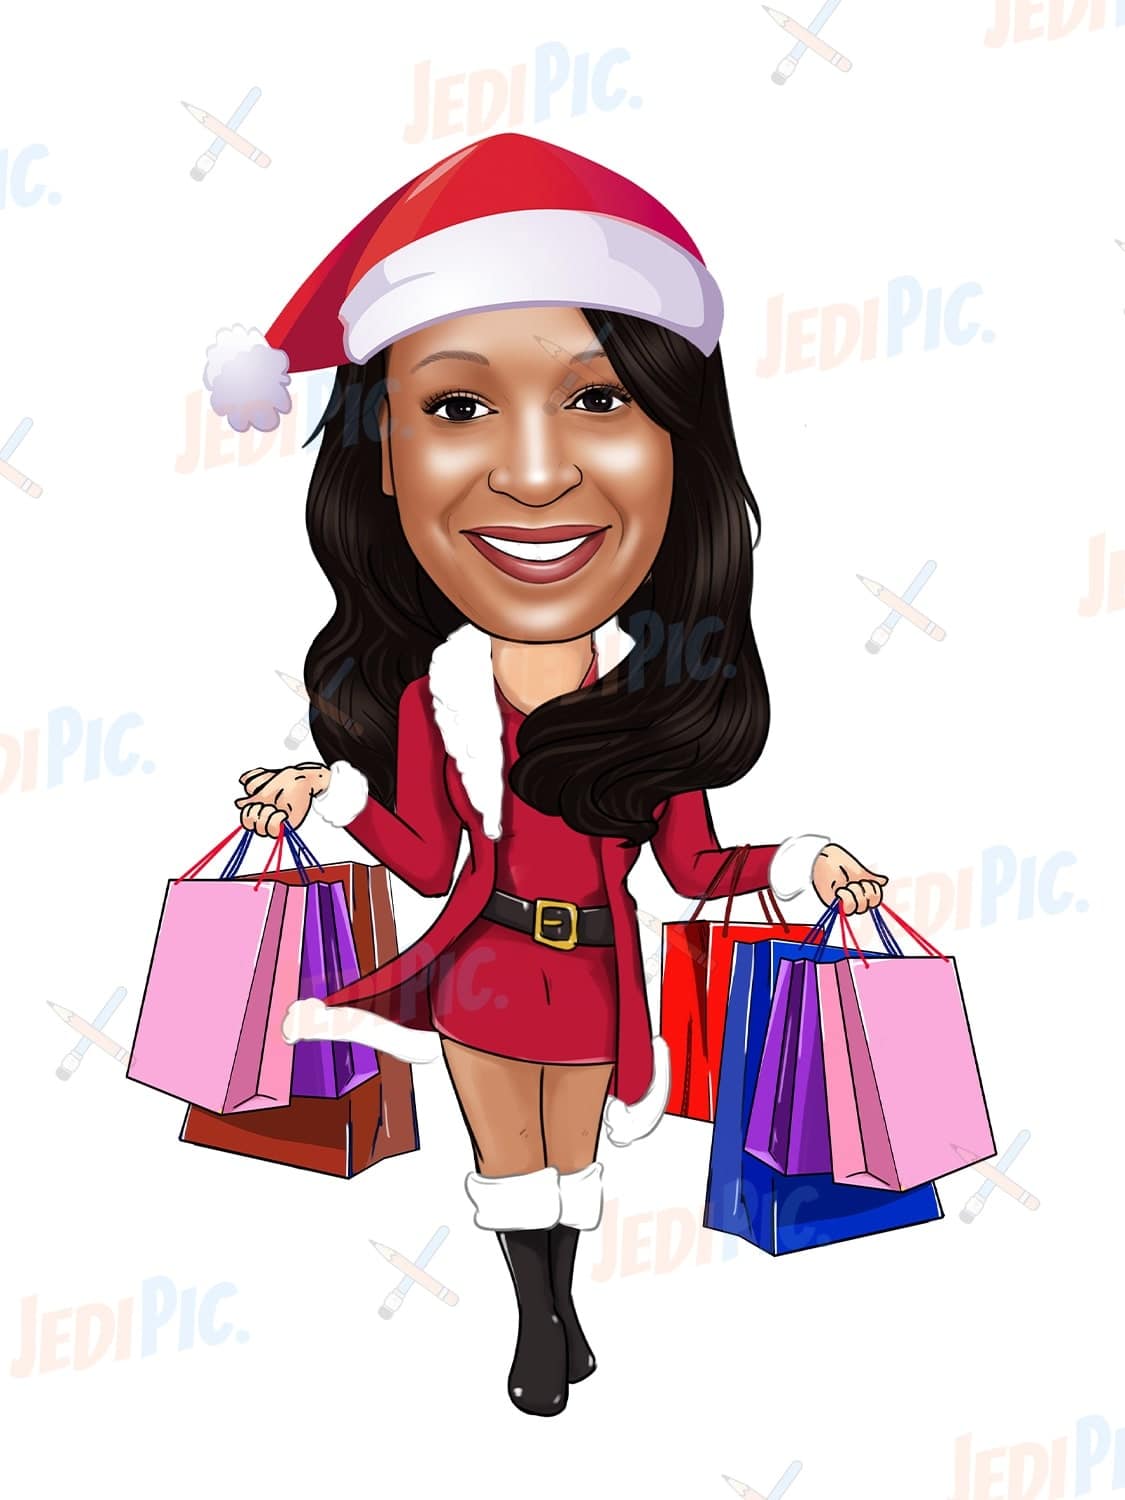 Christmas Caricature from Photo with Santa's Hat